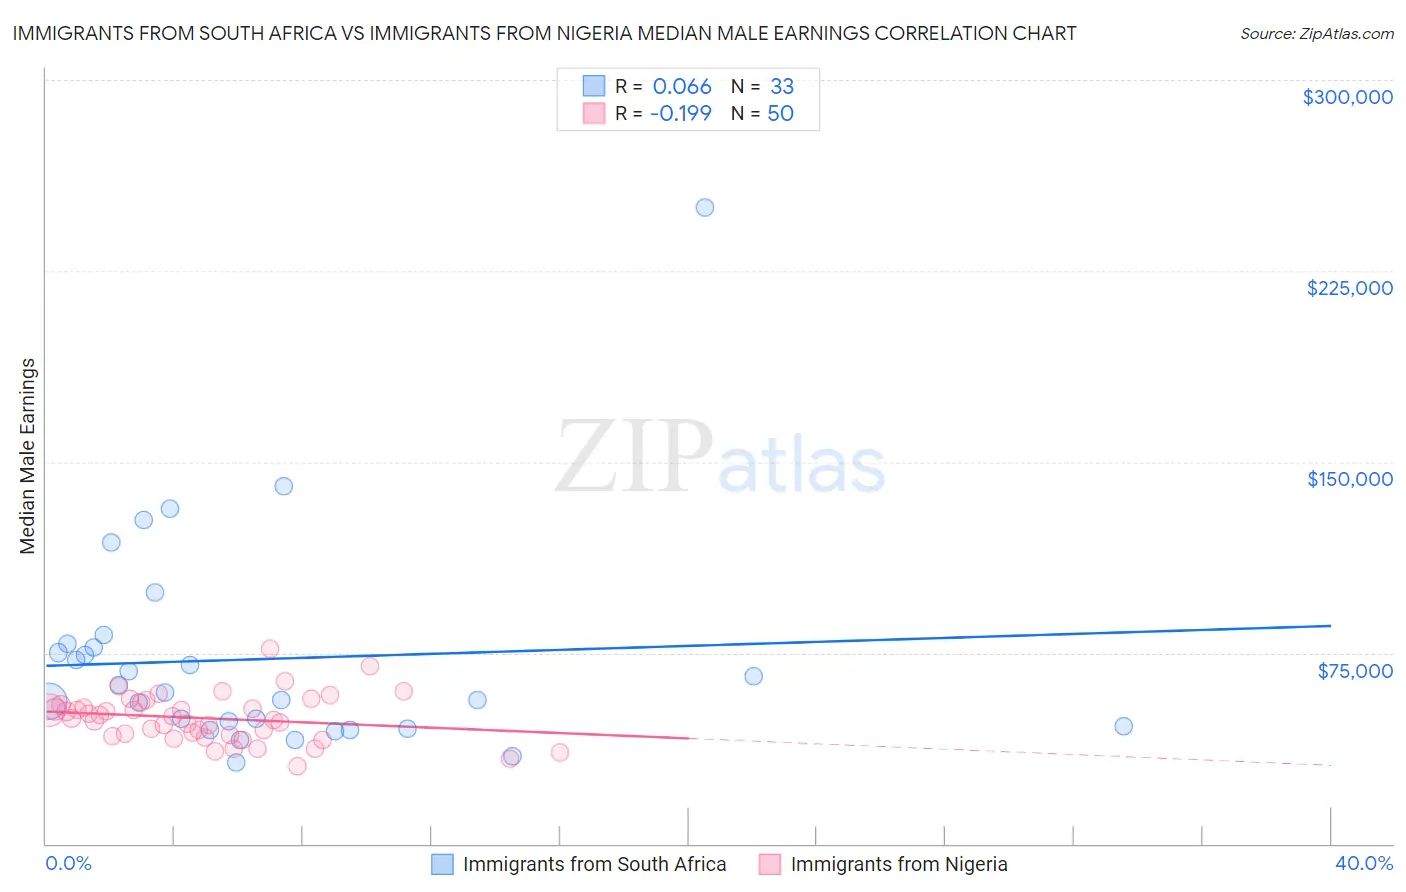 Immigrants from South Africa vs Immigrants from Nigeria Median Male Earnings